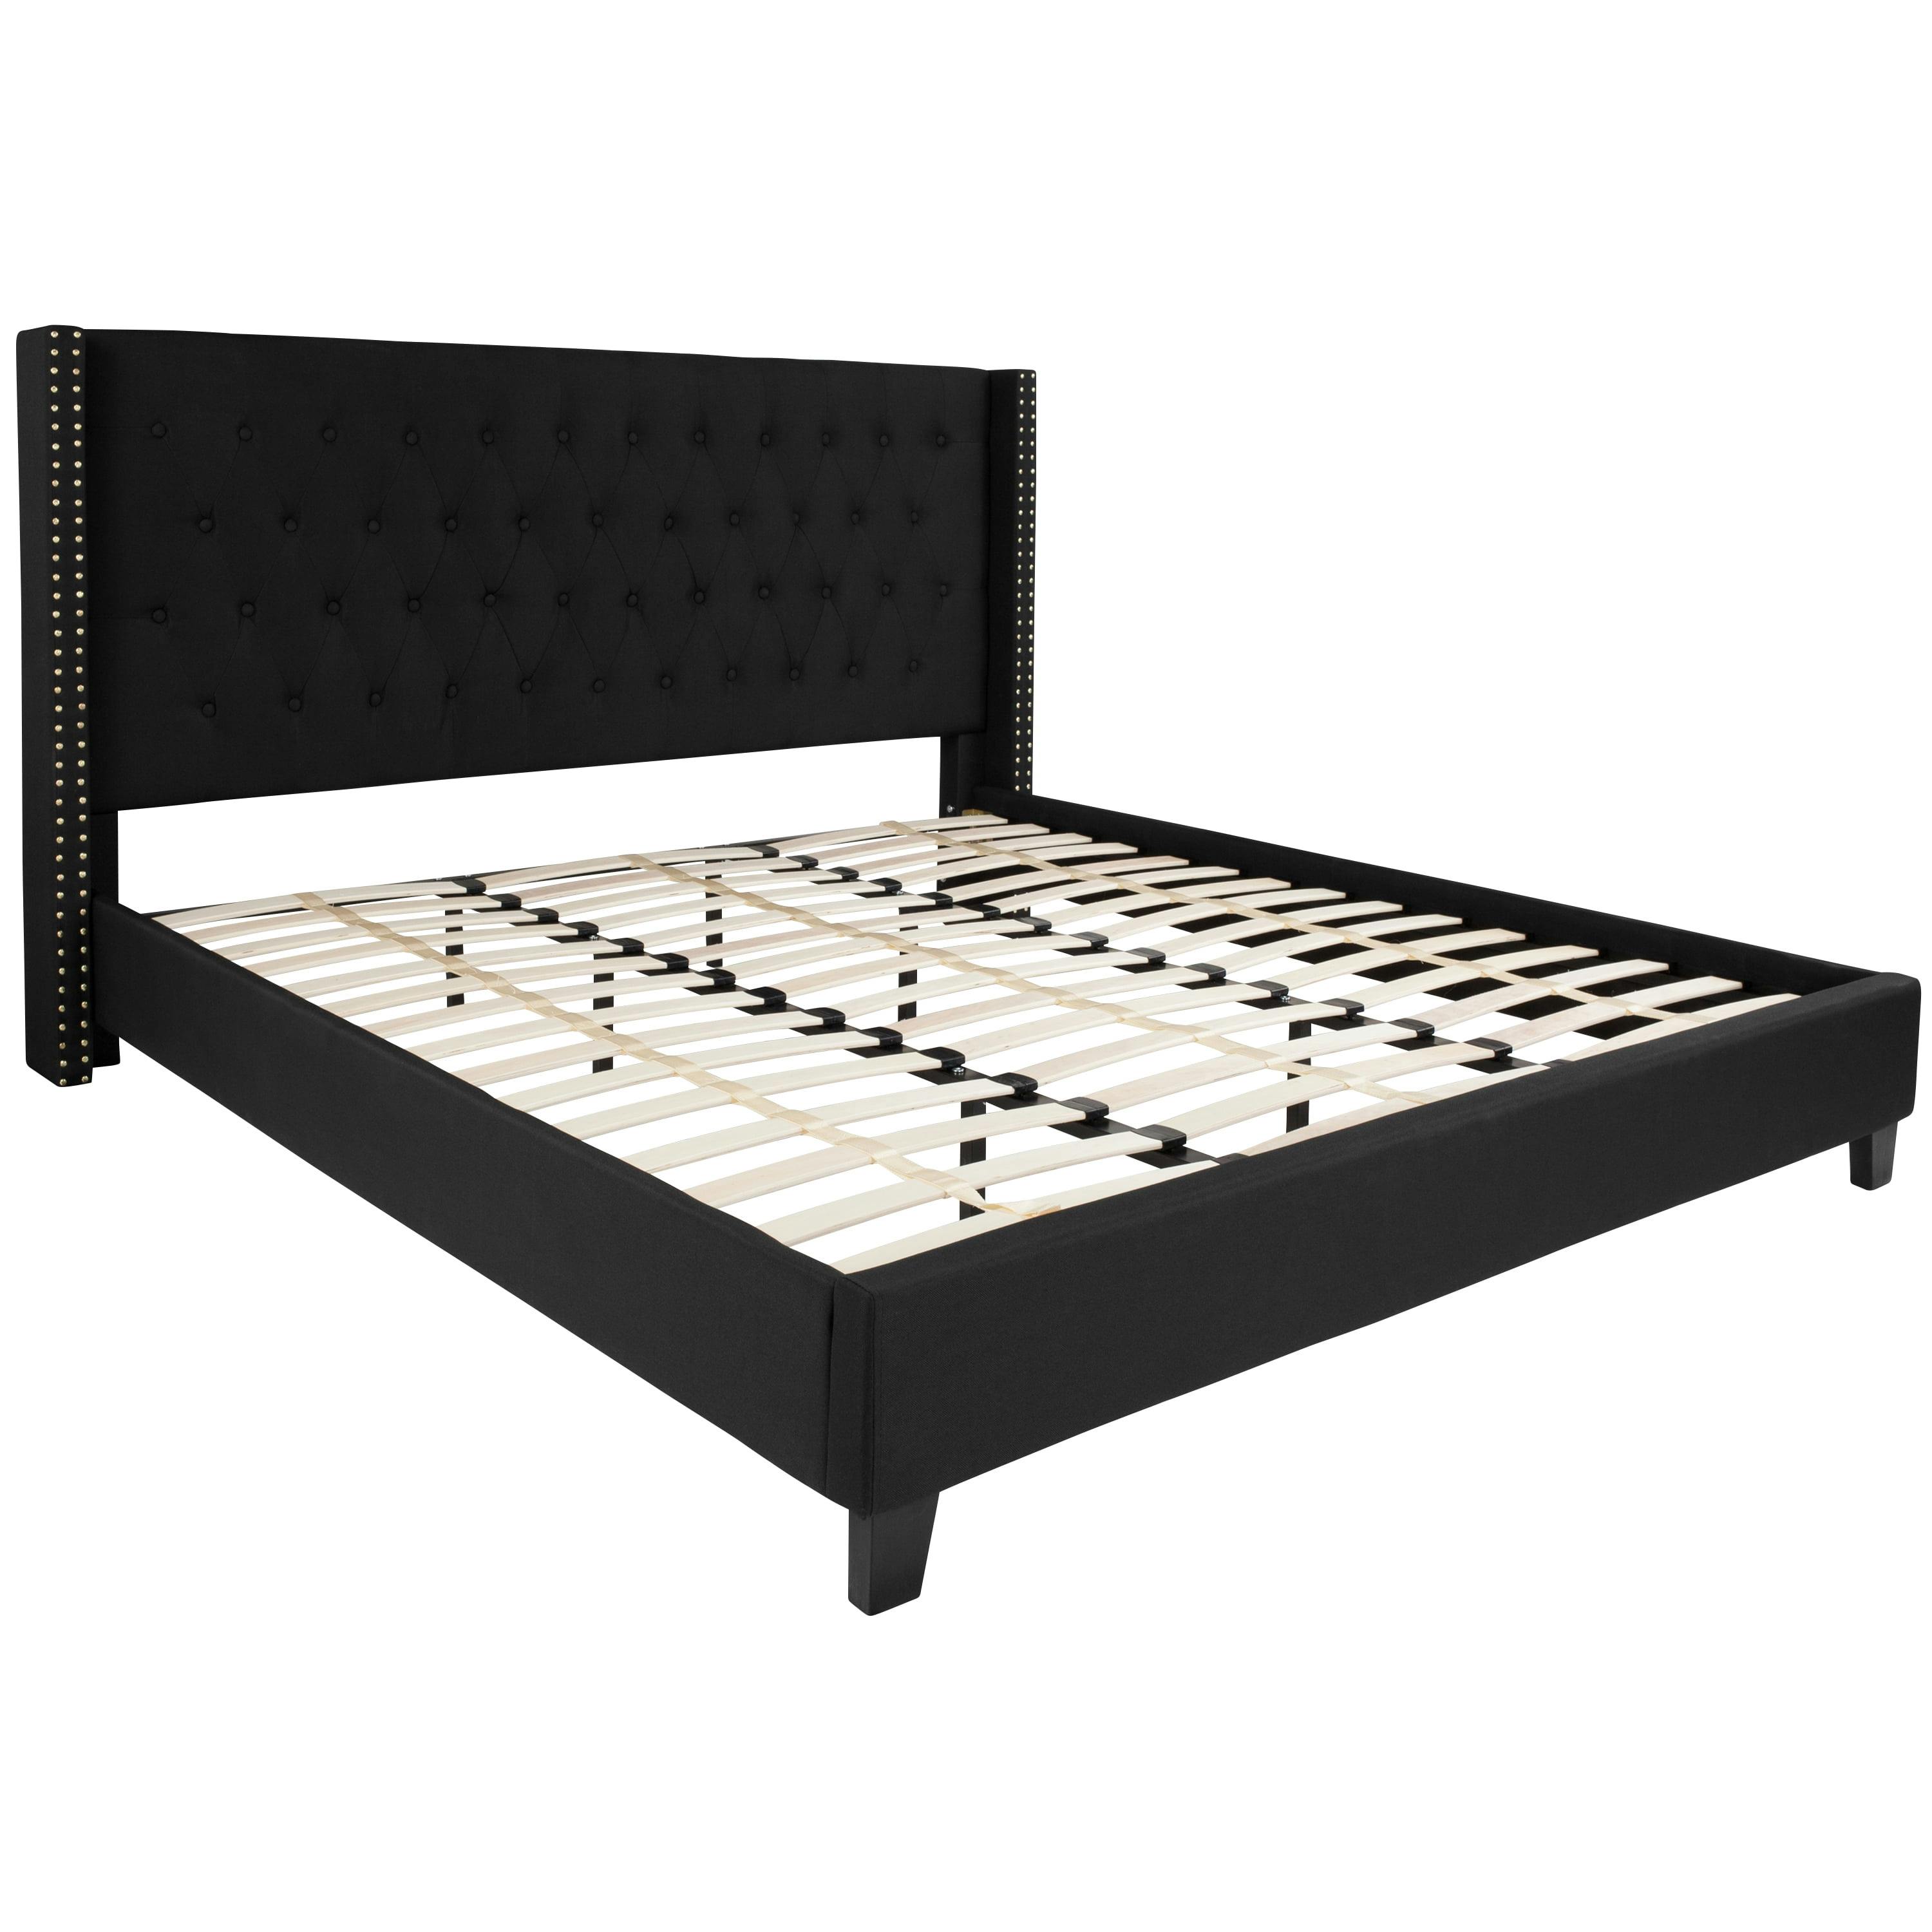 Regal King-Sized Black Metal Frame Bed with Tufted Nailhead Upholstery